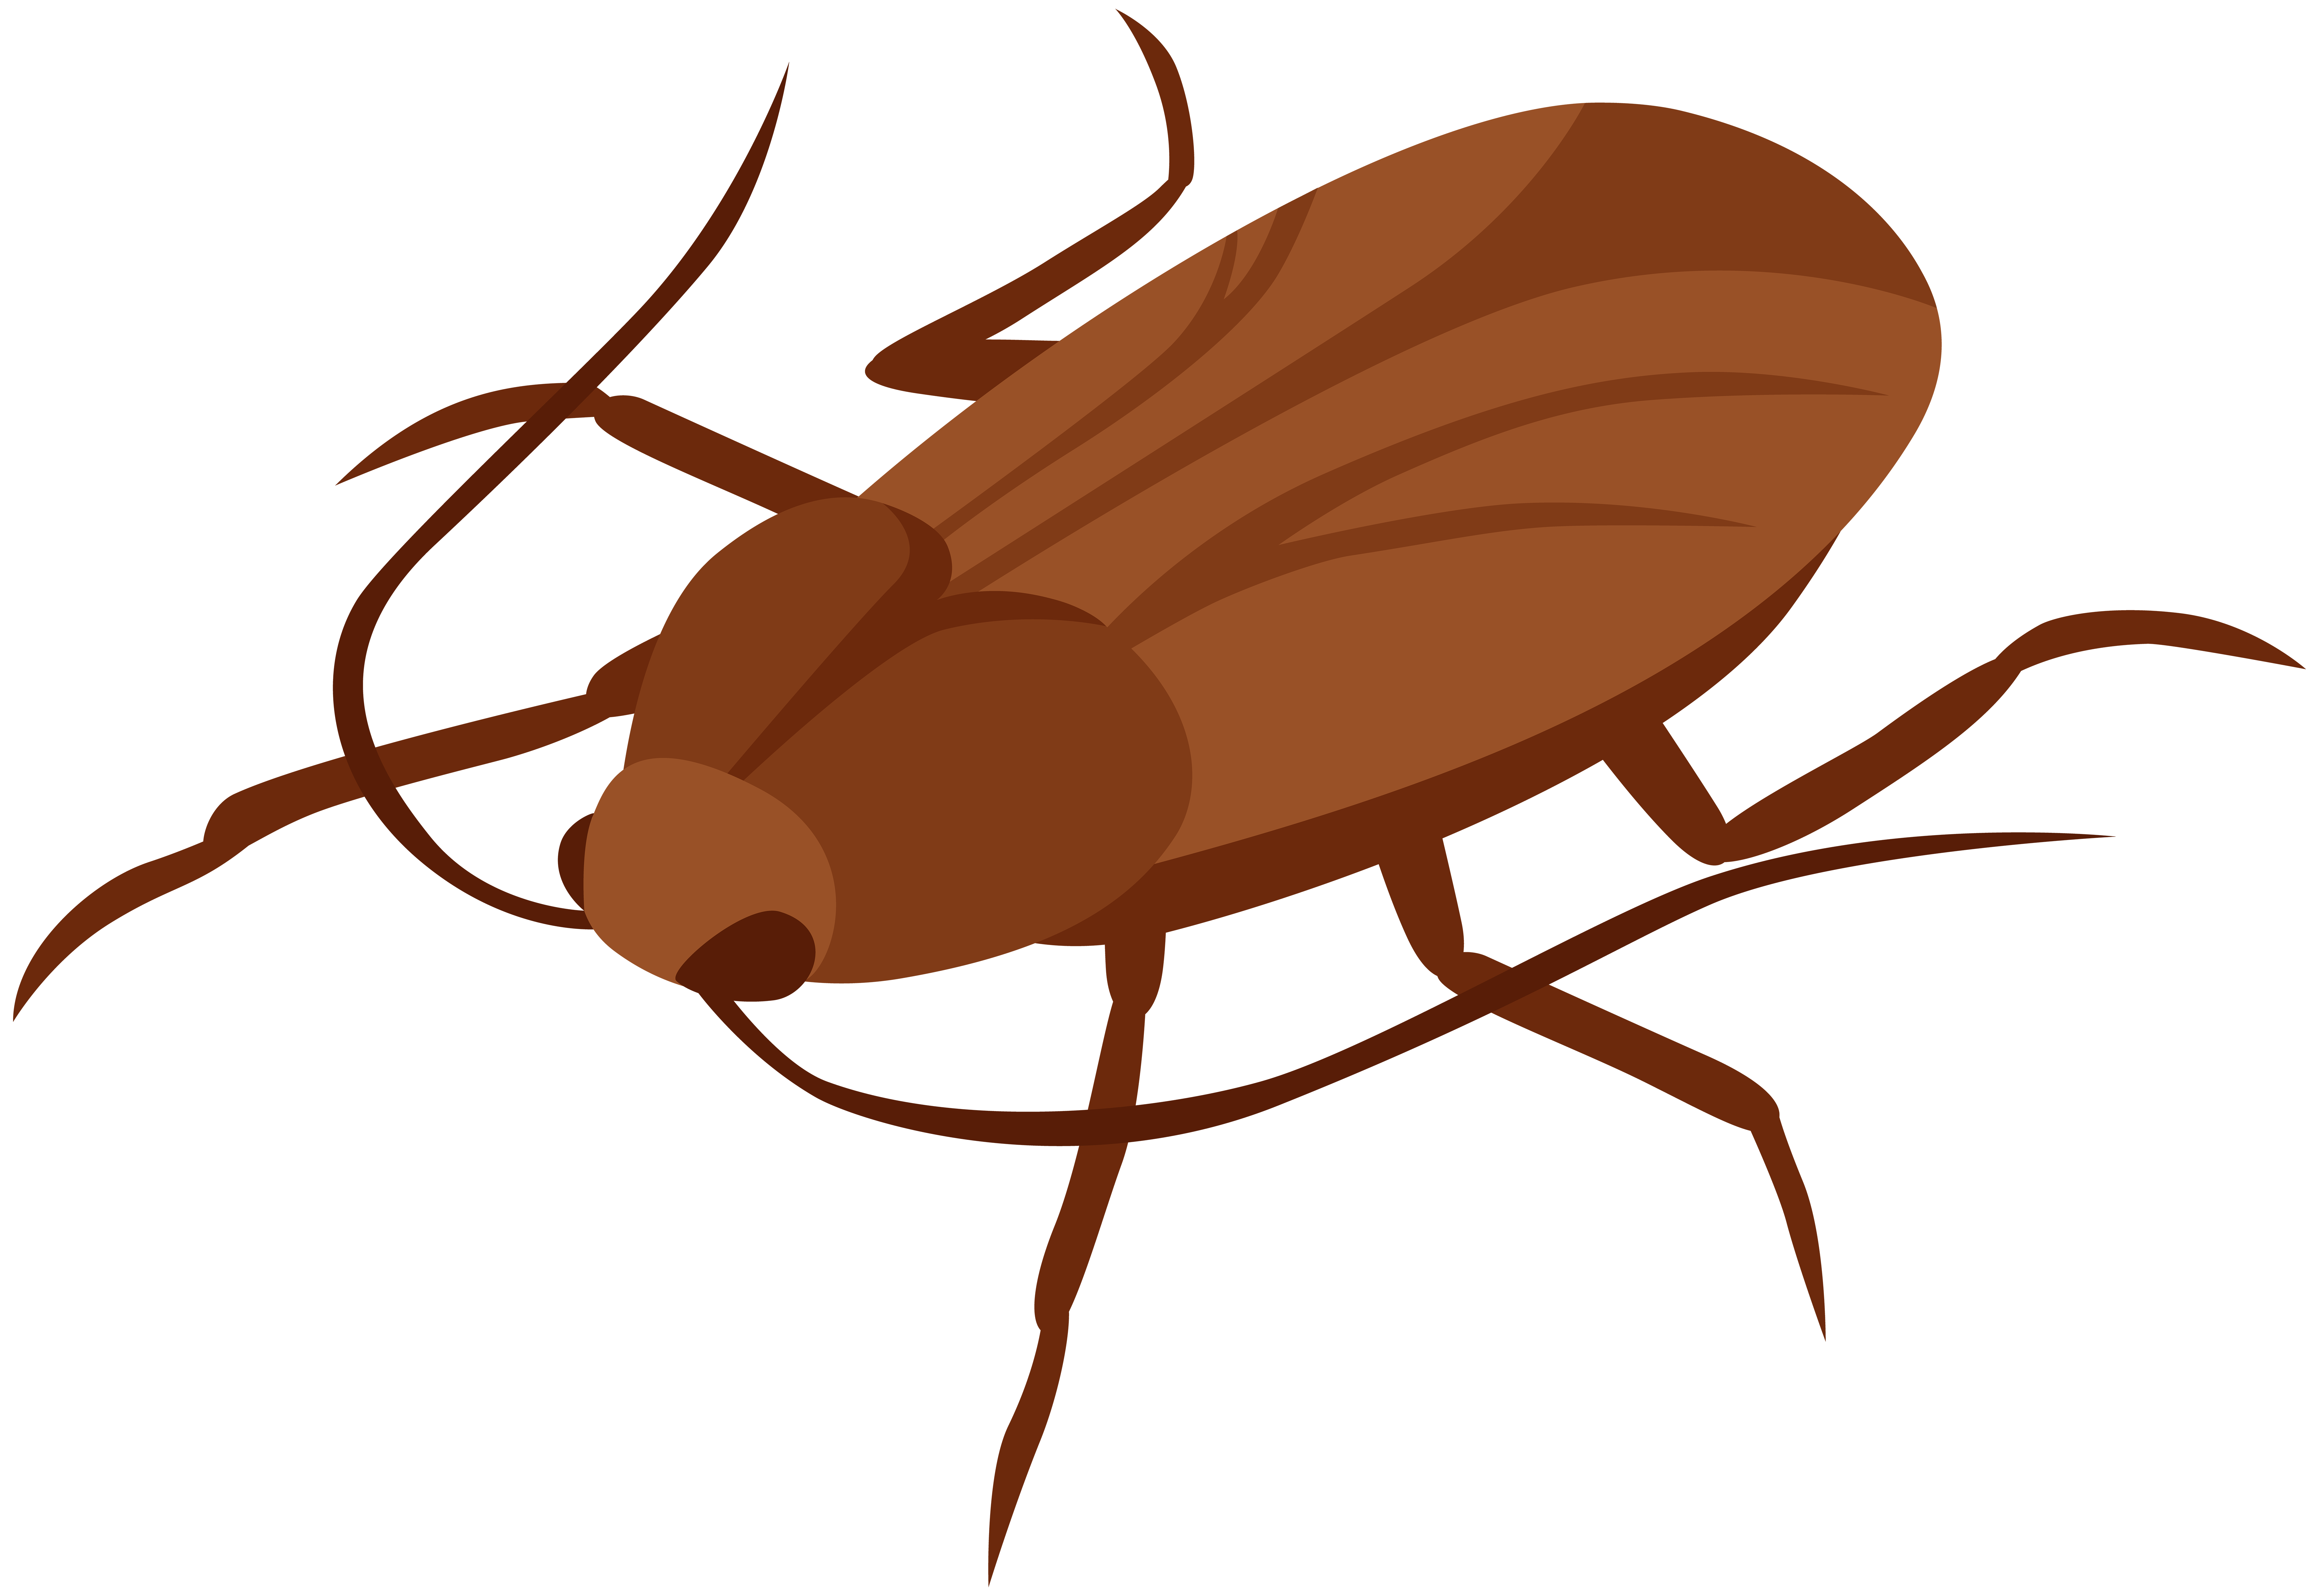 leaf clipart insect